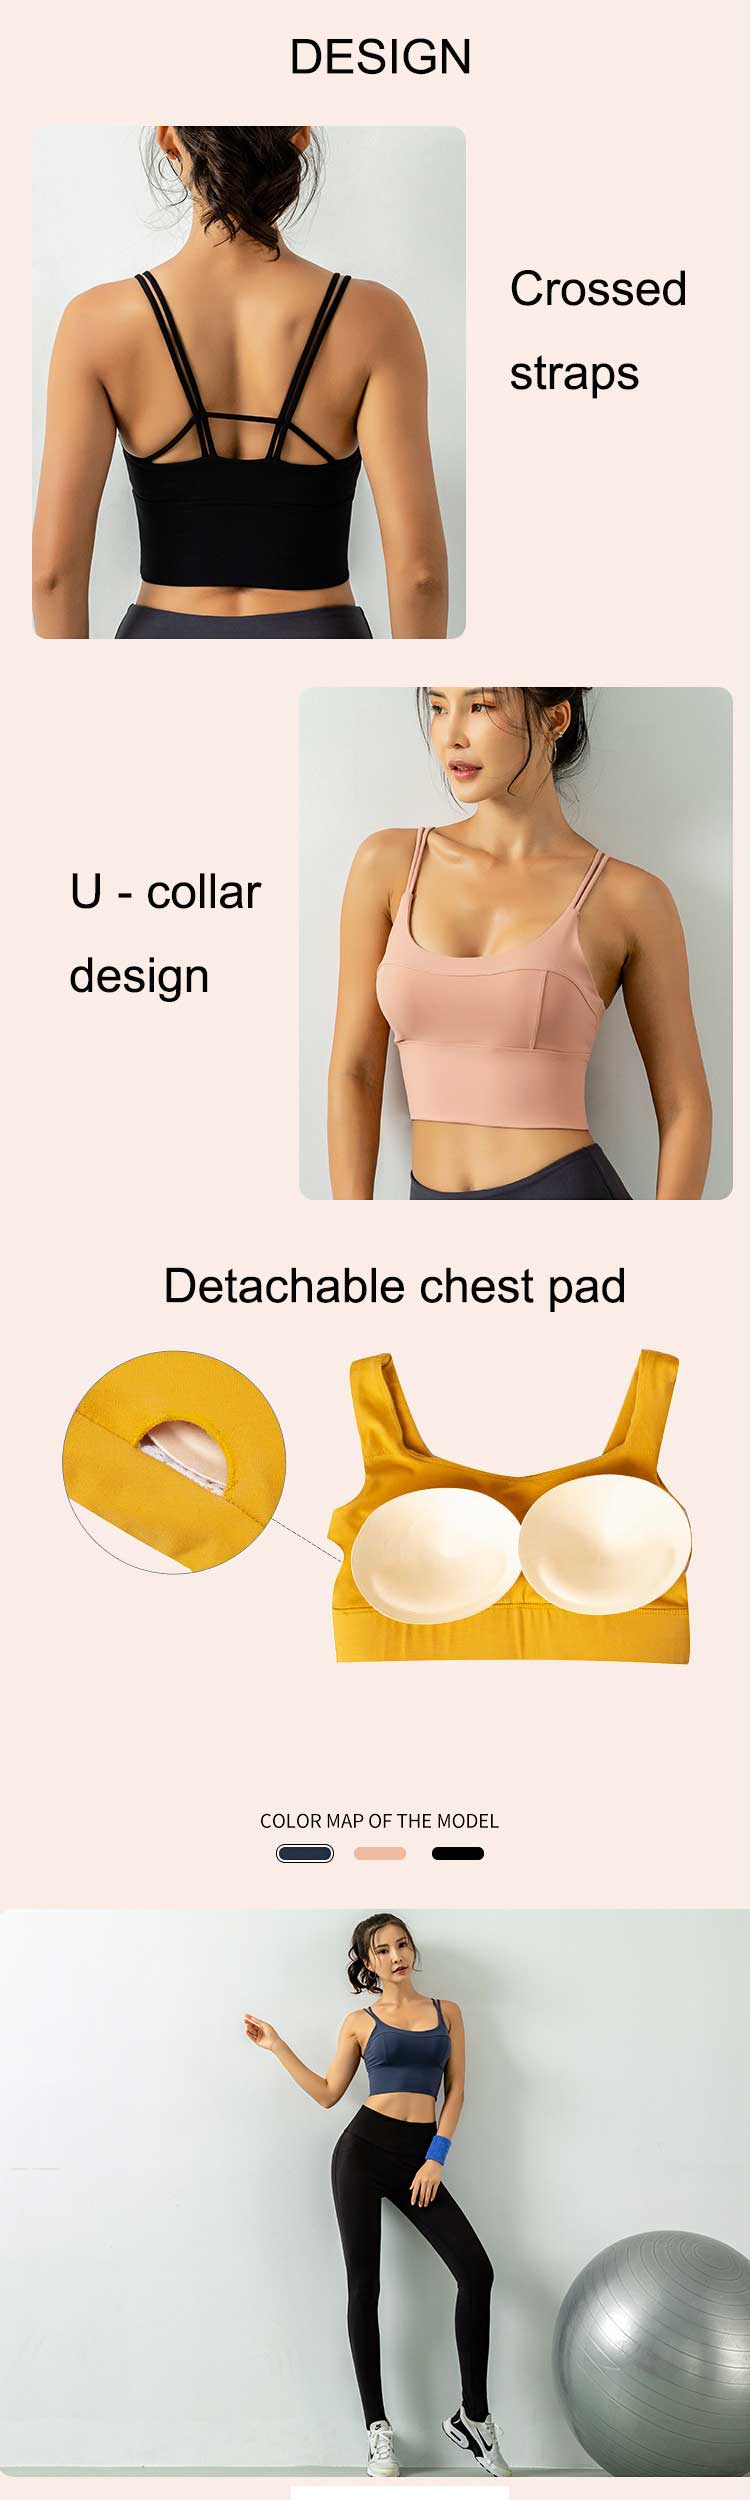 A-cross-strap-is-incorporated-into-the-back-of-the-bra